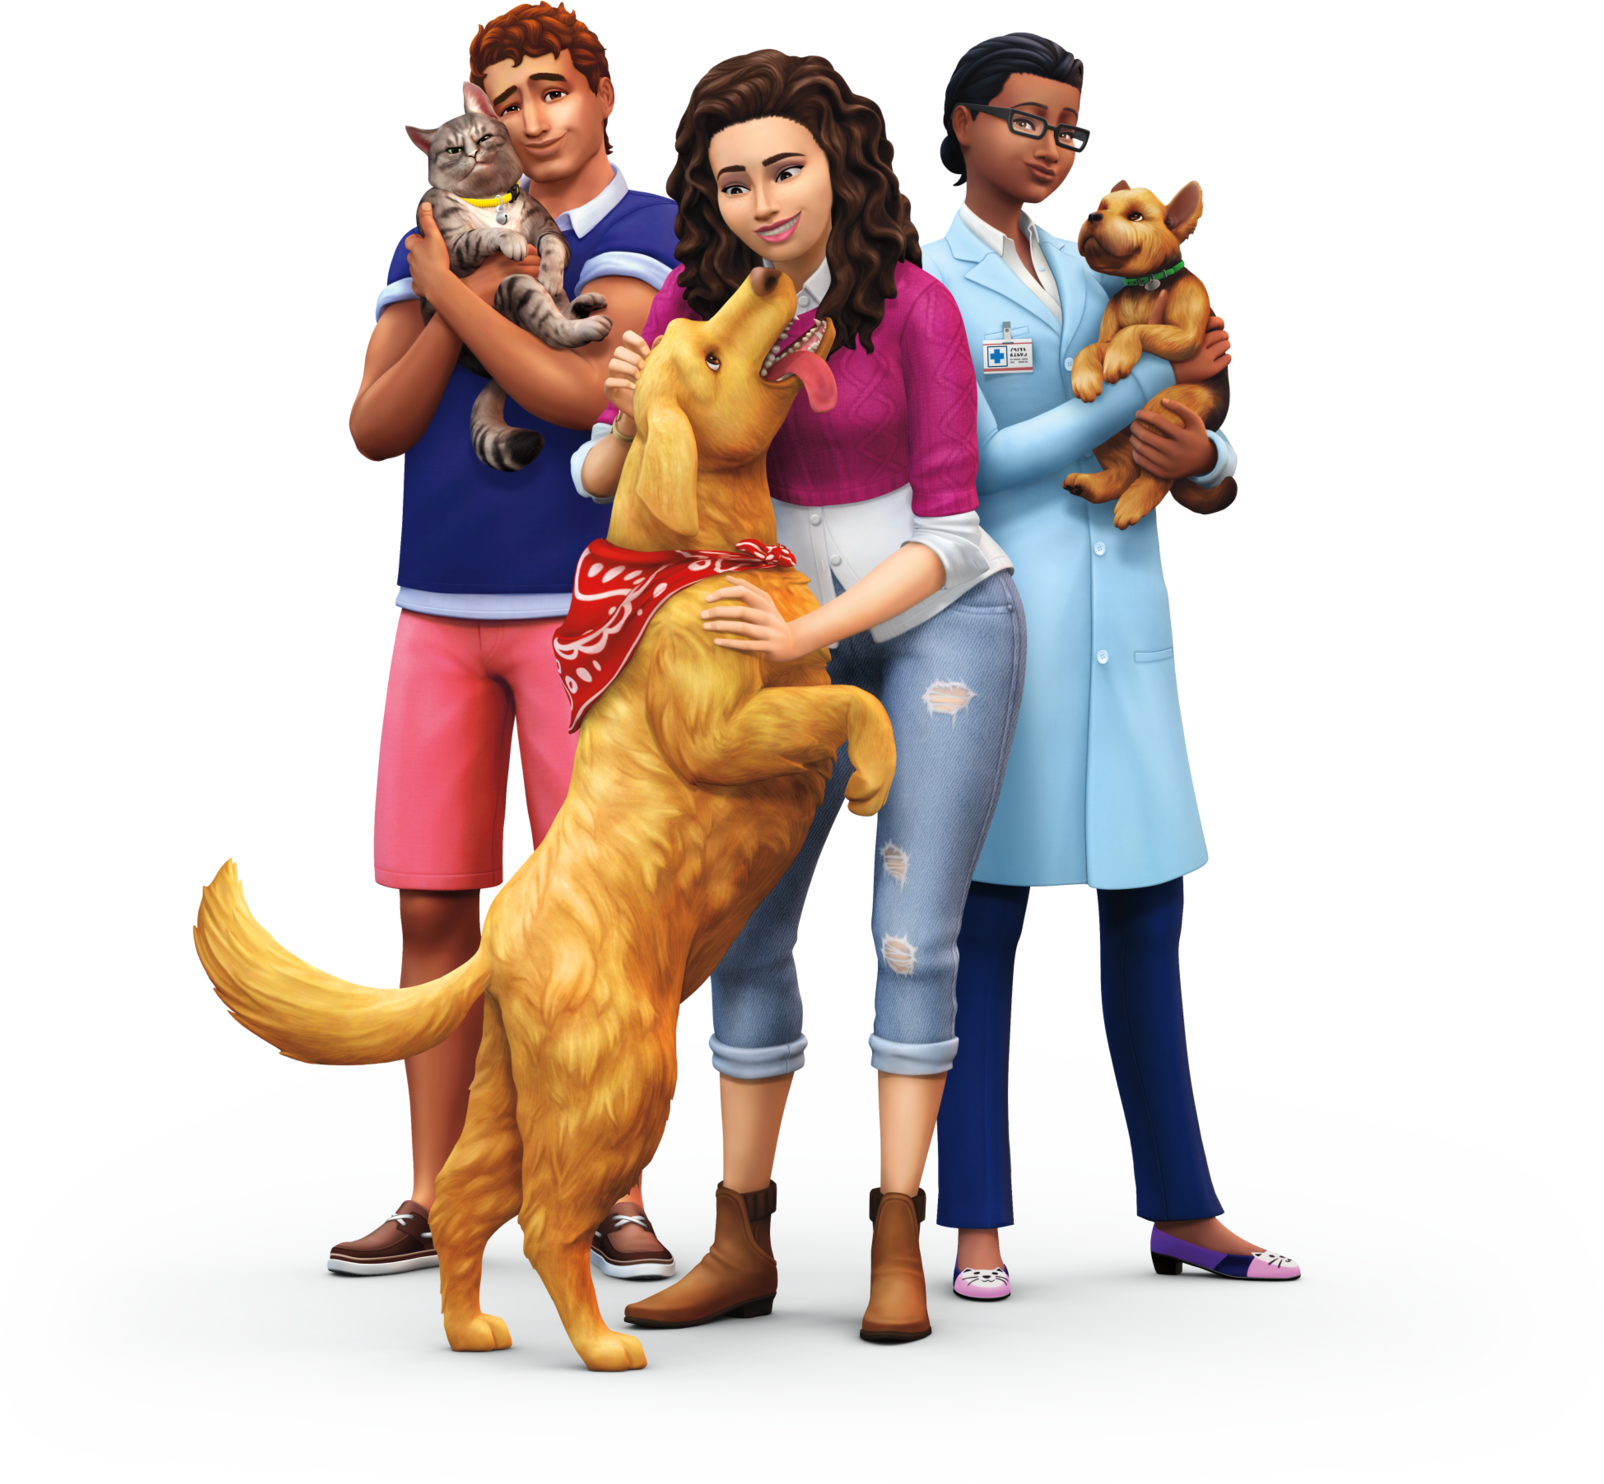 when can you download the sims 4 cats and dogs preorder